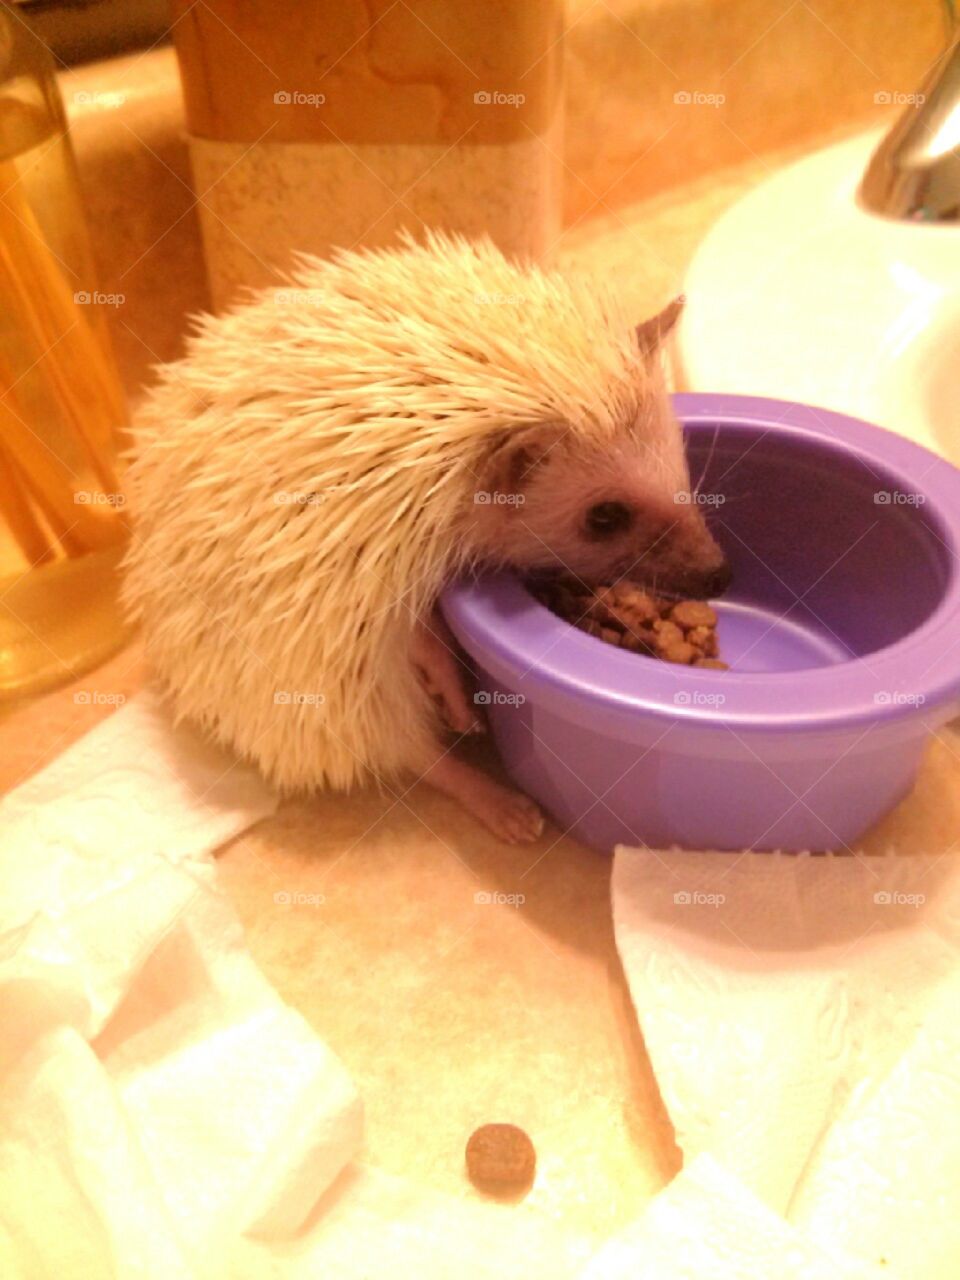 Baby Hedgehog Eating. This is my little silver hedgehog, Pika. She is trying to eat, but is too small to reach over the bowl. So she just kind of.. sat there, and waited for me to help haha.